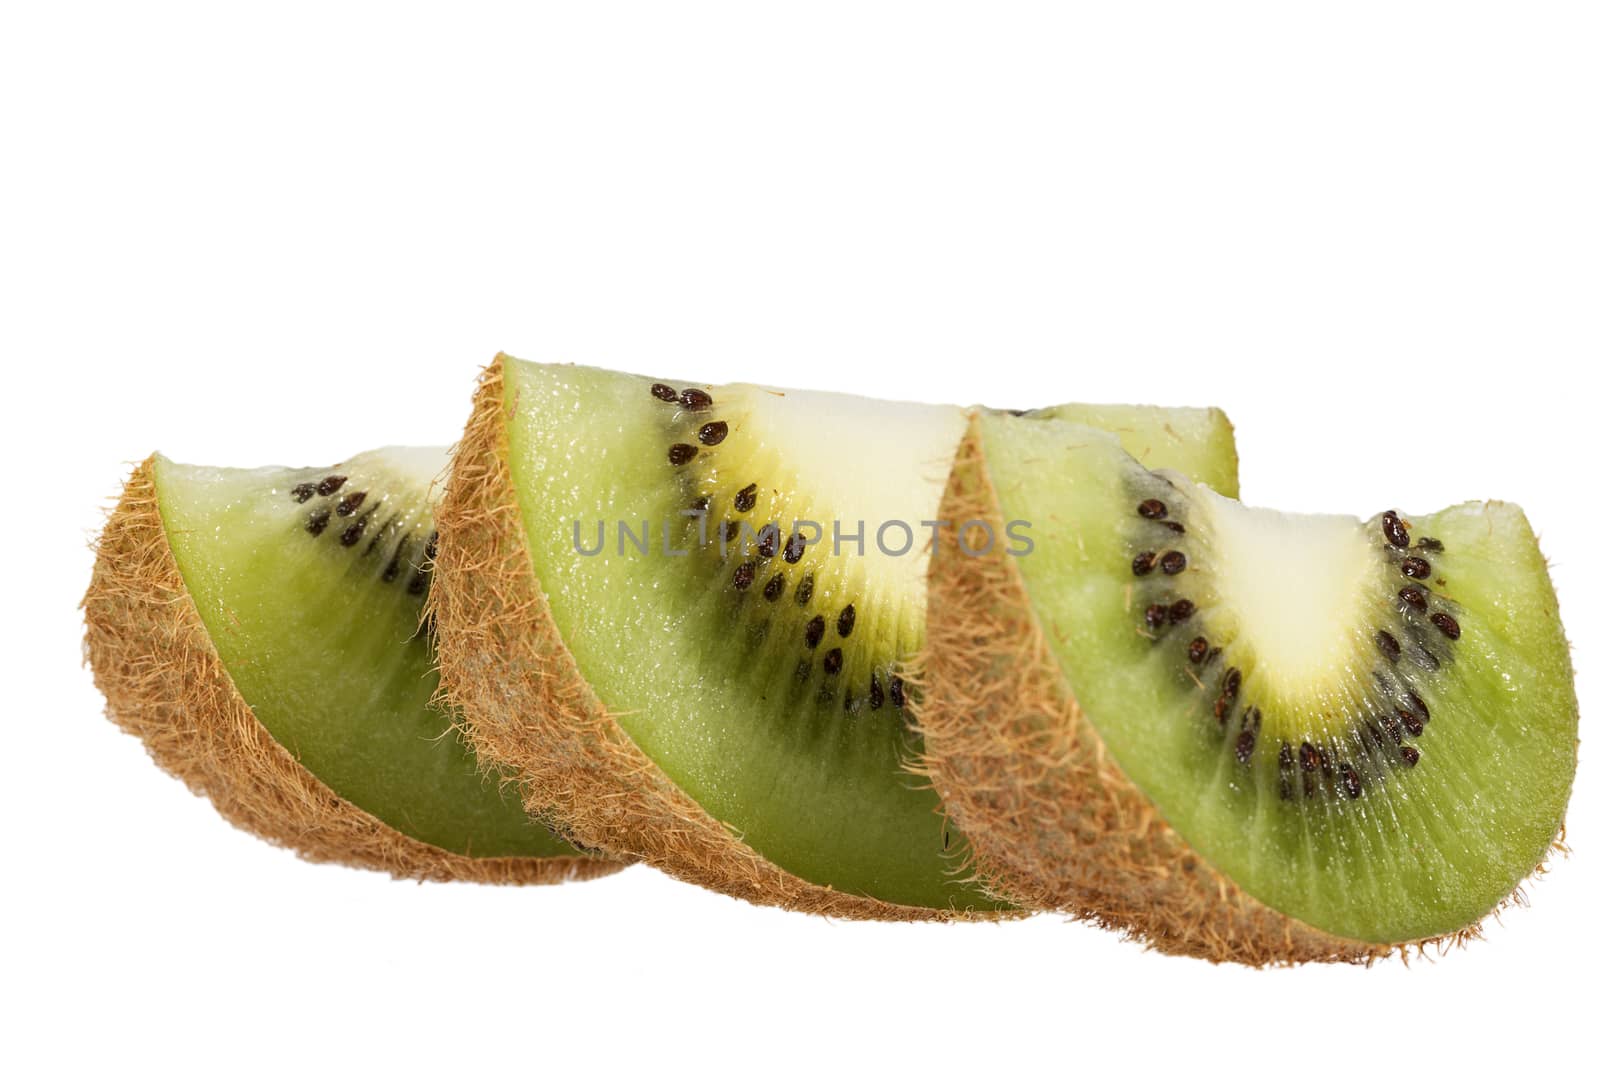 Pieces of green kiwi isolated on white background by mychadre77